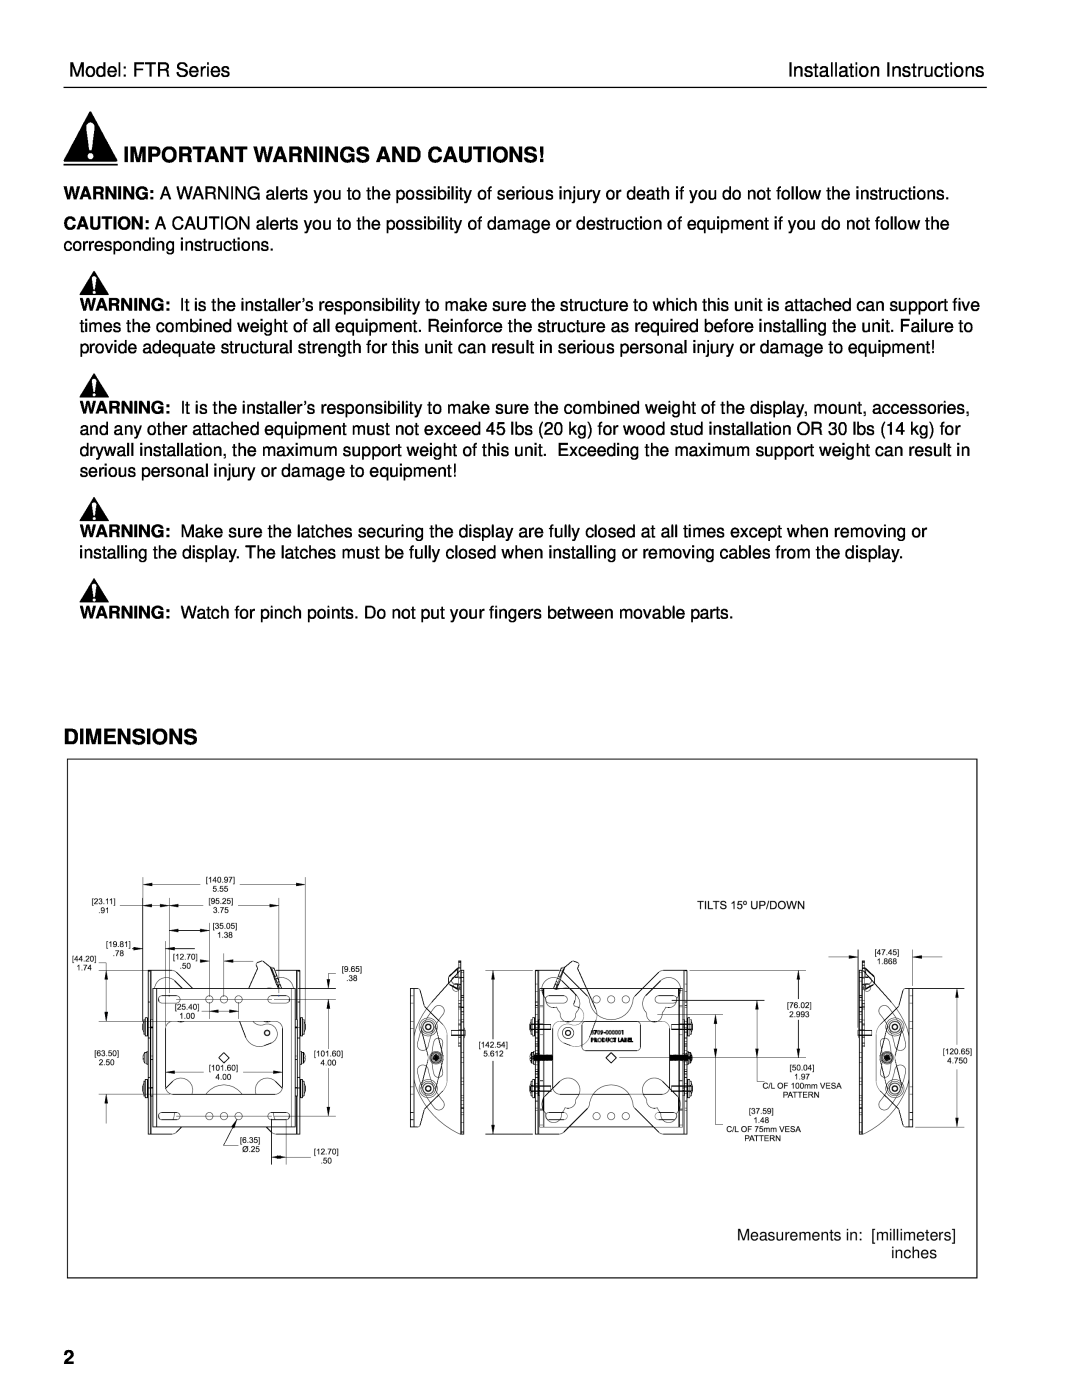 Chief Manufacturing Important Warnings And Cautions, Dimensions, Model FTR Series, Installation Instructions 